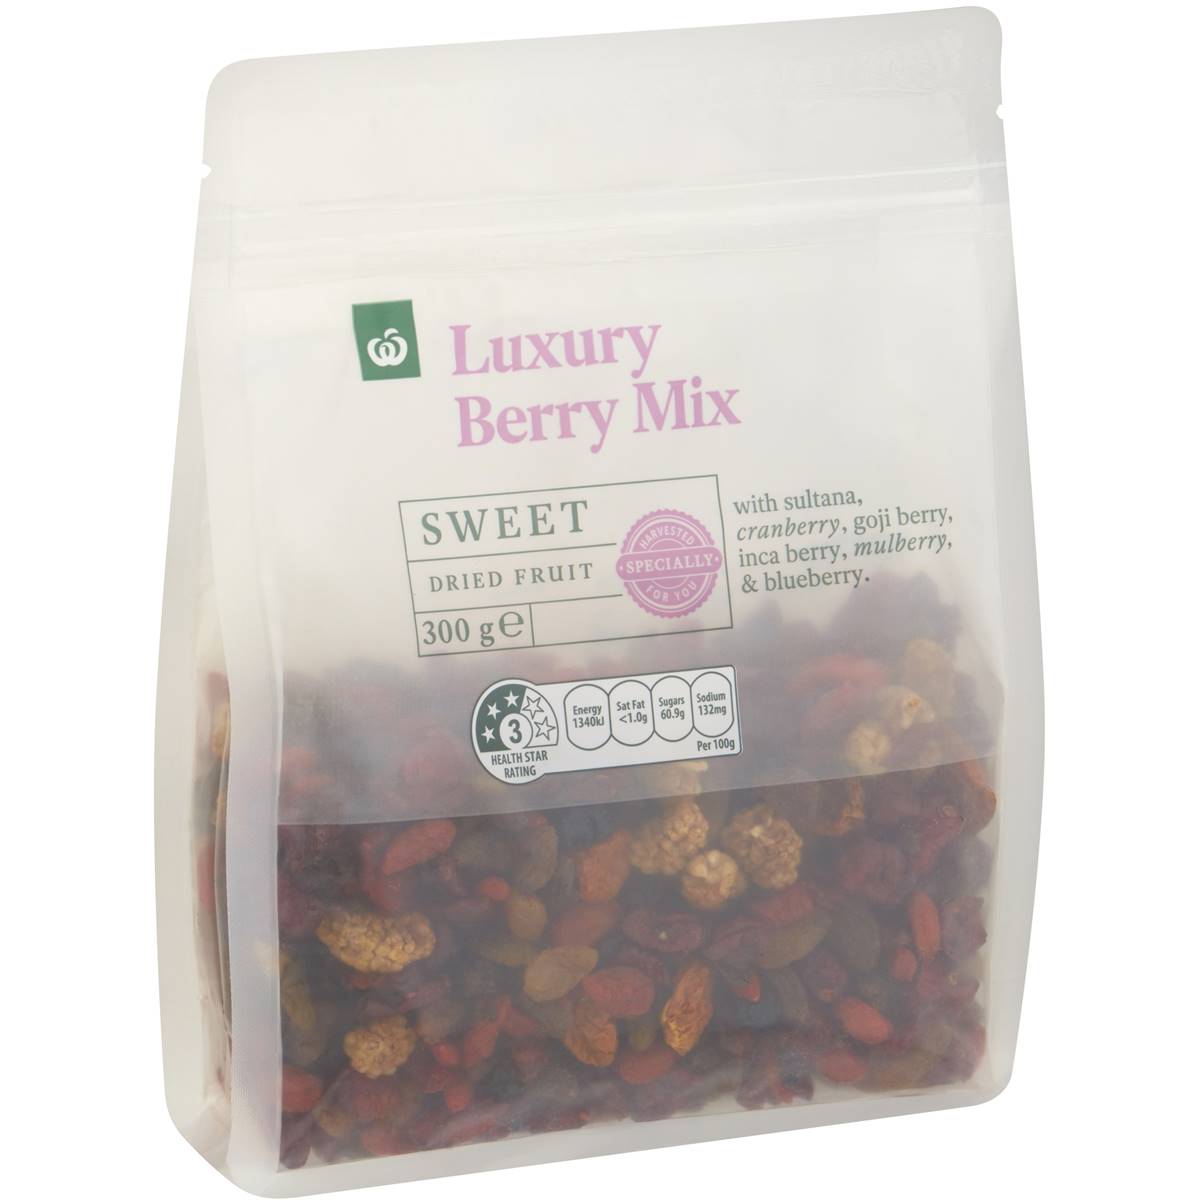 Calories in Woolworths Luxury Dried Fruit Berry Mix